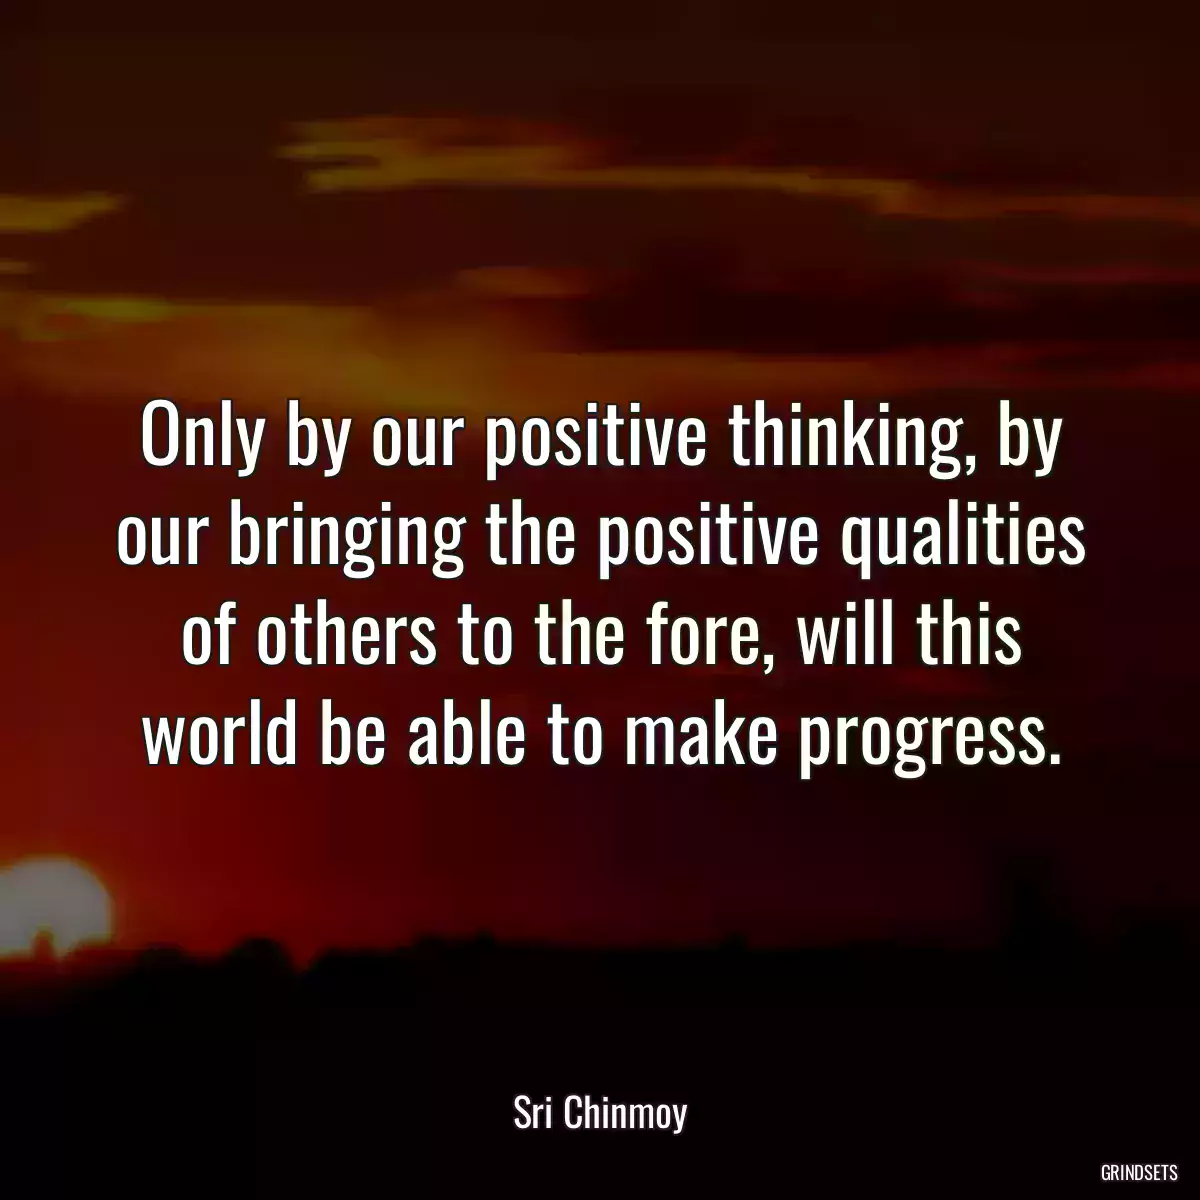 Only by our positive thinking, by our bringing the positive qualities of others to the fore, will this world be able to make progress.